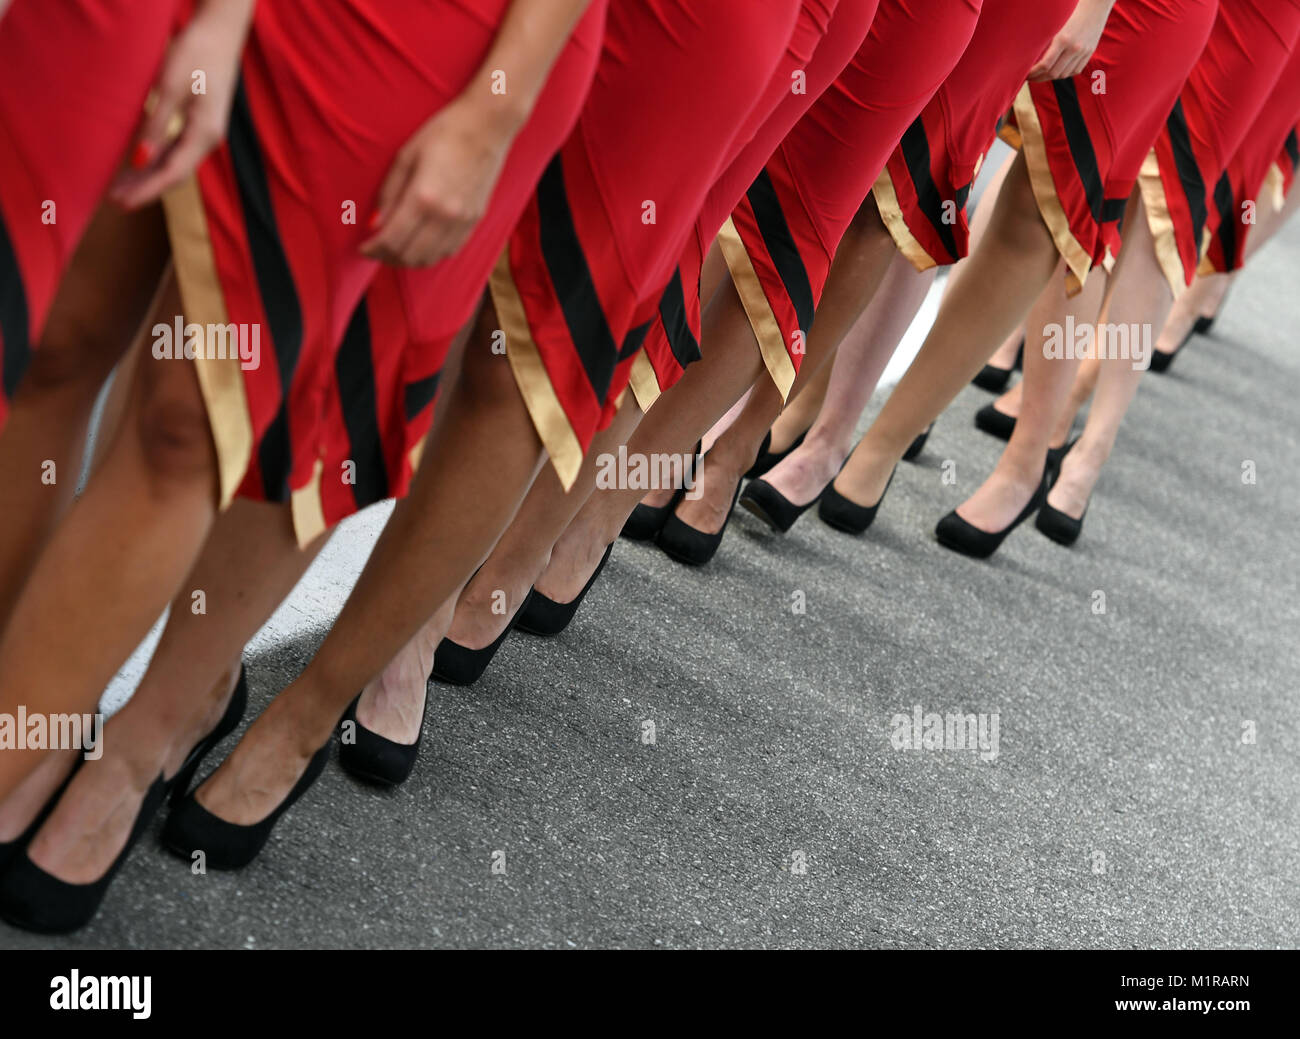 Hockenheim, Germany. 30th July, 2016. Grid Girls stand on the pit lane after the qualifier on the Hockenheimring in Hockenheim, Germany, 30 July 2016. The German Grand Prix takes place on 31 July 2016. Credit: ULI DECK/dpa | usage worldwide/dpa/Alamy Live News Stock Photo